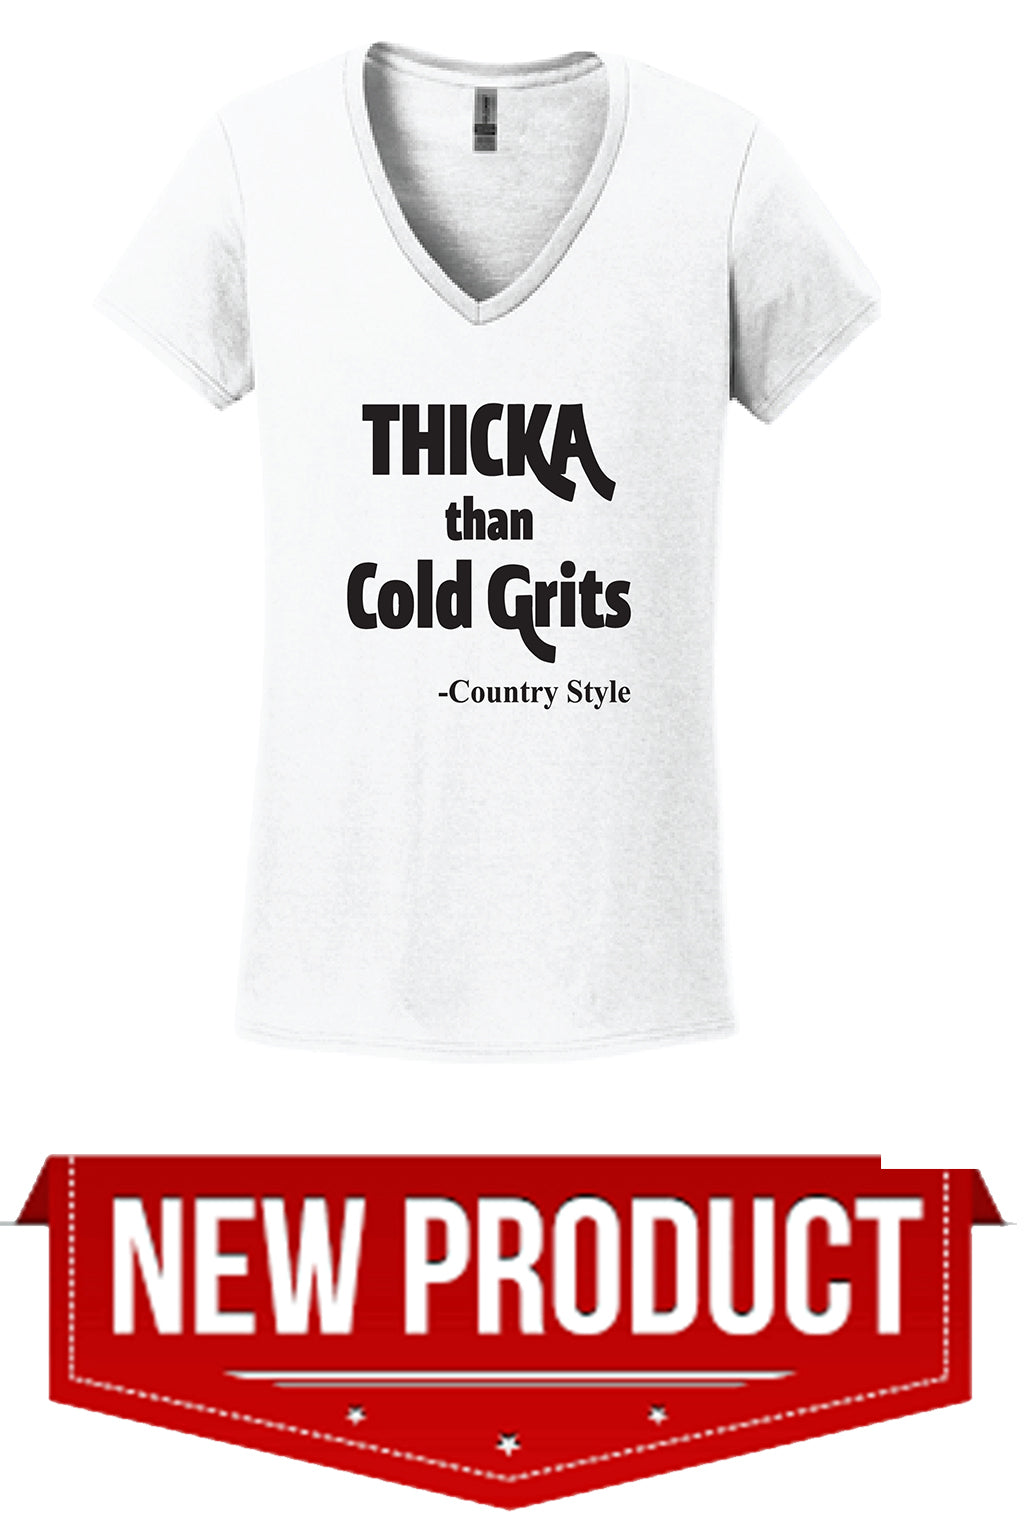 Thicka Than Cold Grits White V-Neck Sizes S-3XL